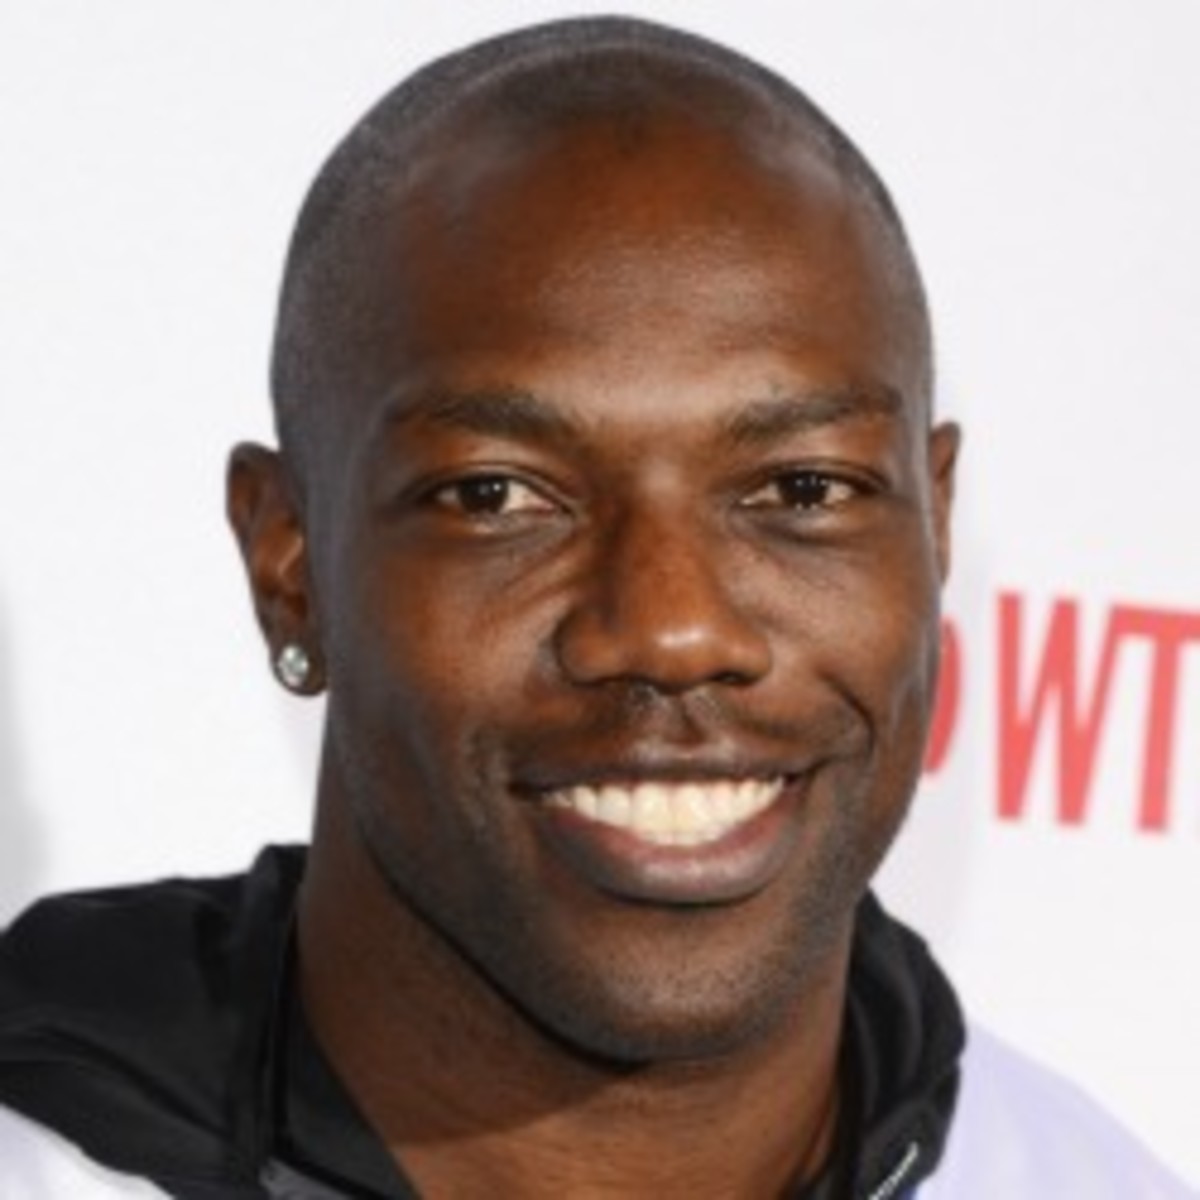 Terrell Owens was reportedly confronted by police after banging on a woman's door for three hours Friday morning. (Jason Merritt/Getty Images)